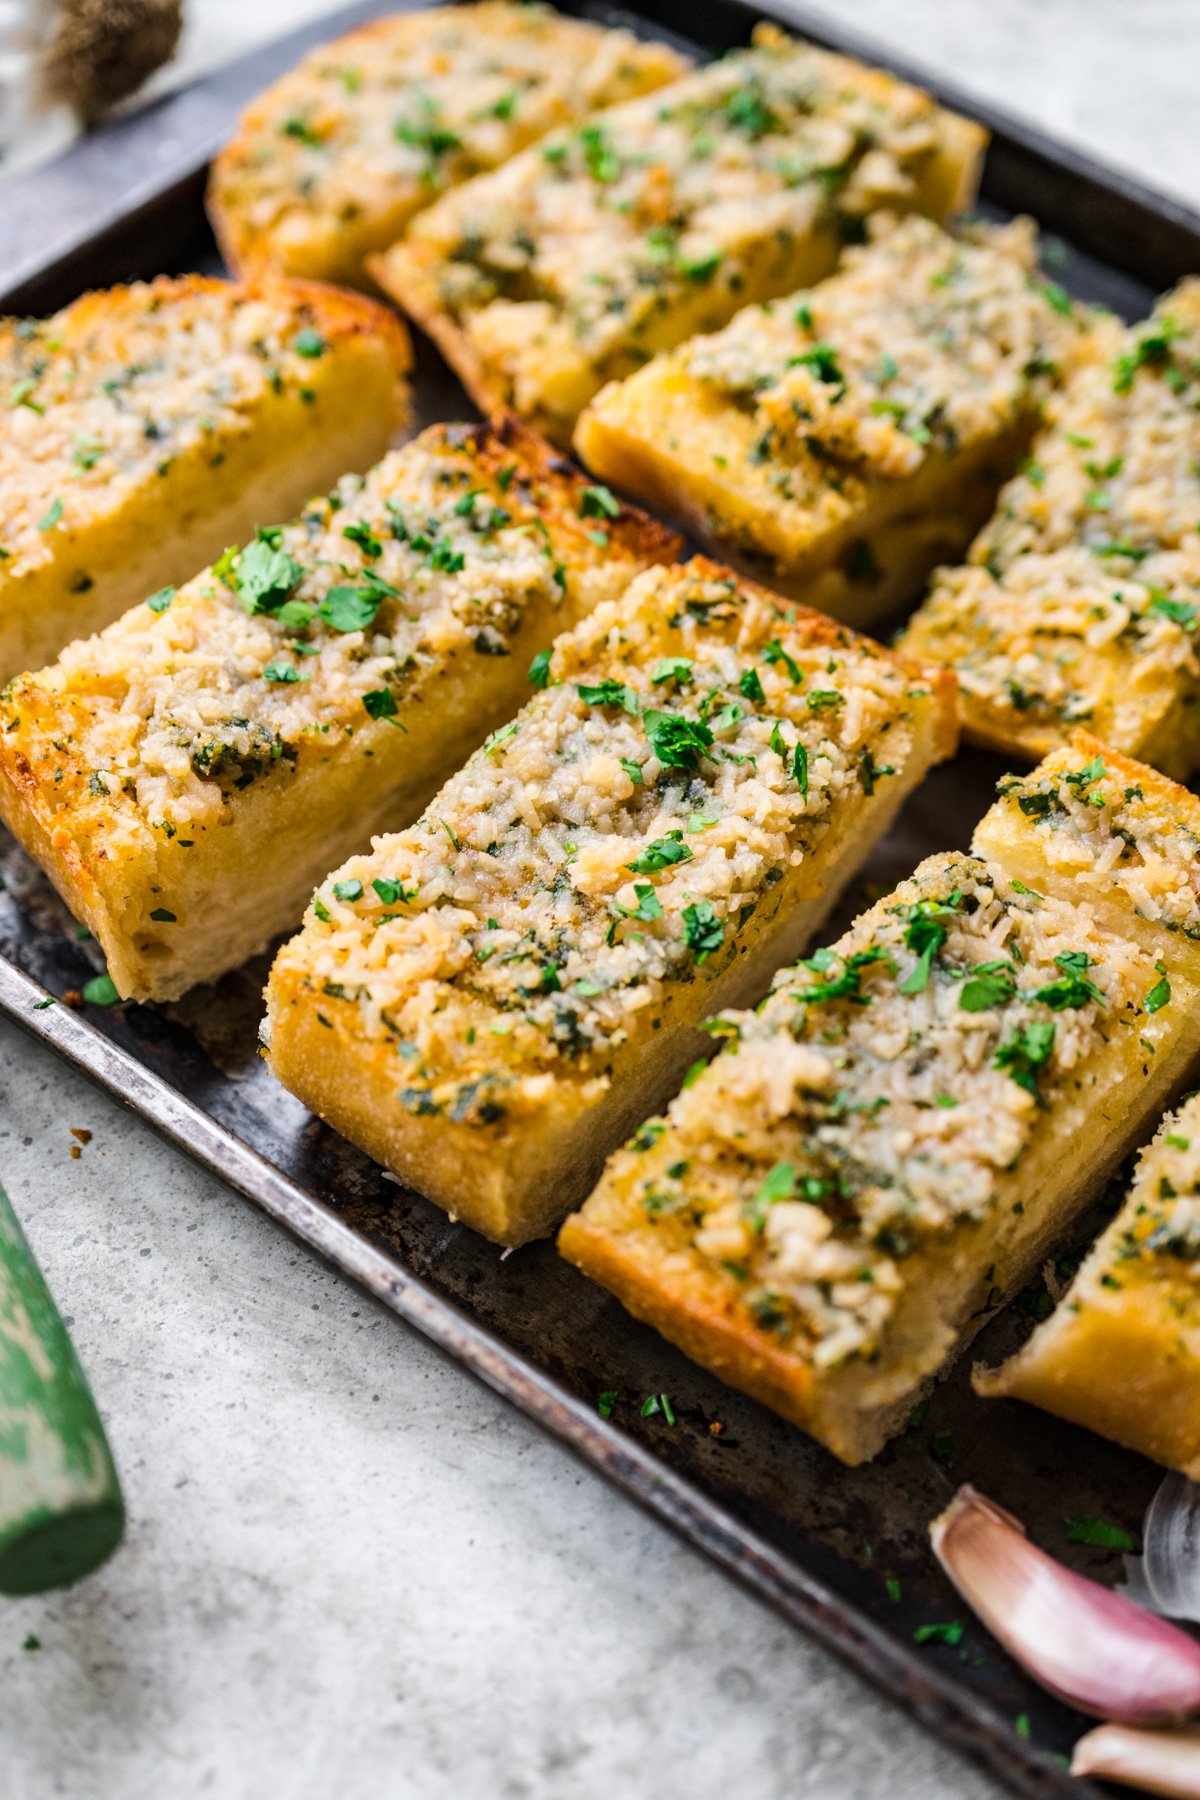 Overhead view of vegan garlic bread with vegan cheese and a garnish of herbs.